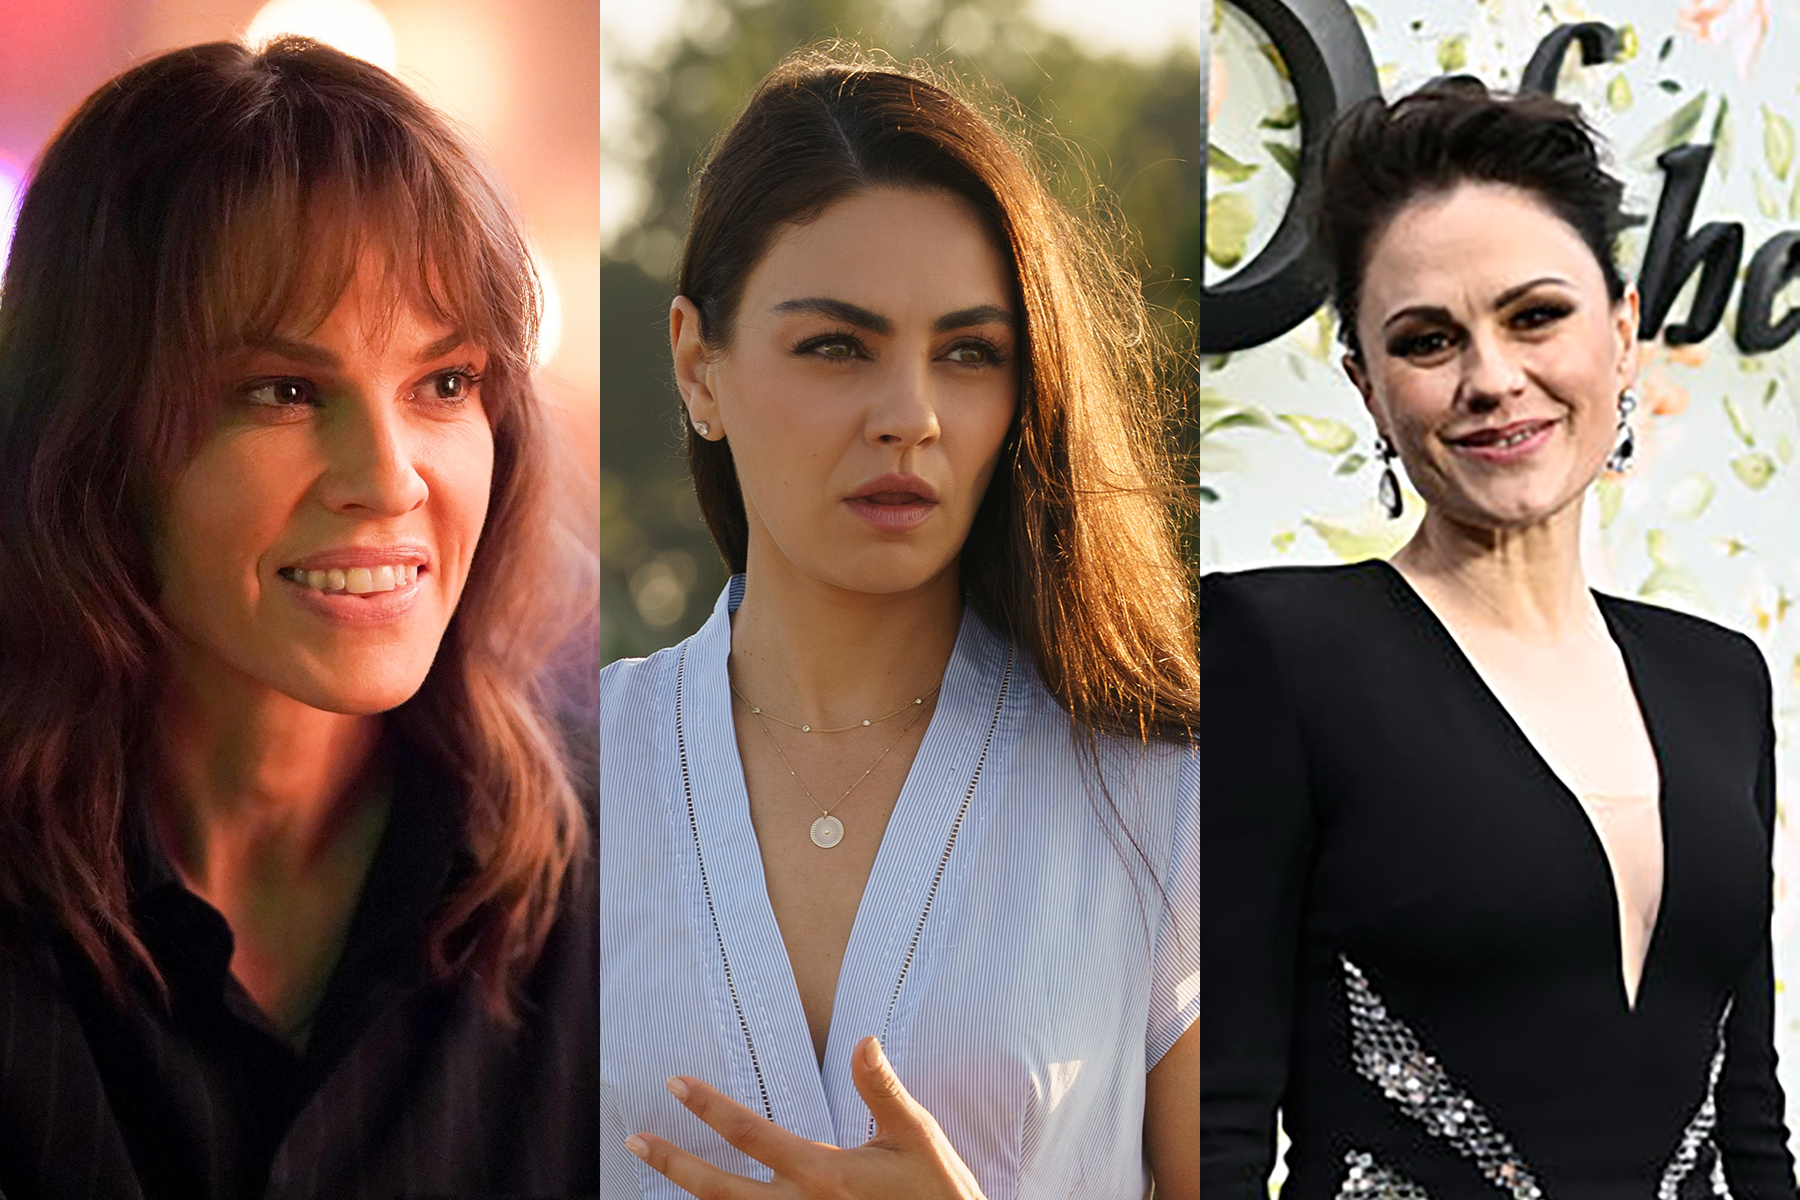 TV best bets with Hilary Swank, Mila Kunis, Anna Paquin, Greys Anatomy, Young Sheldon